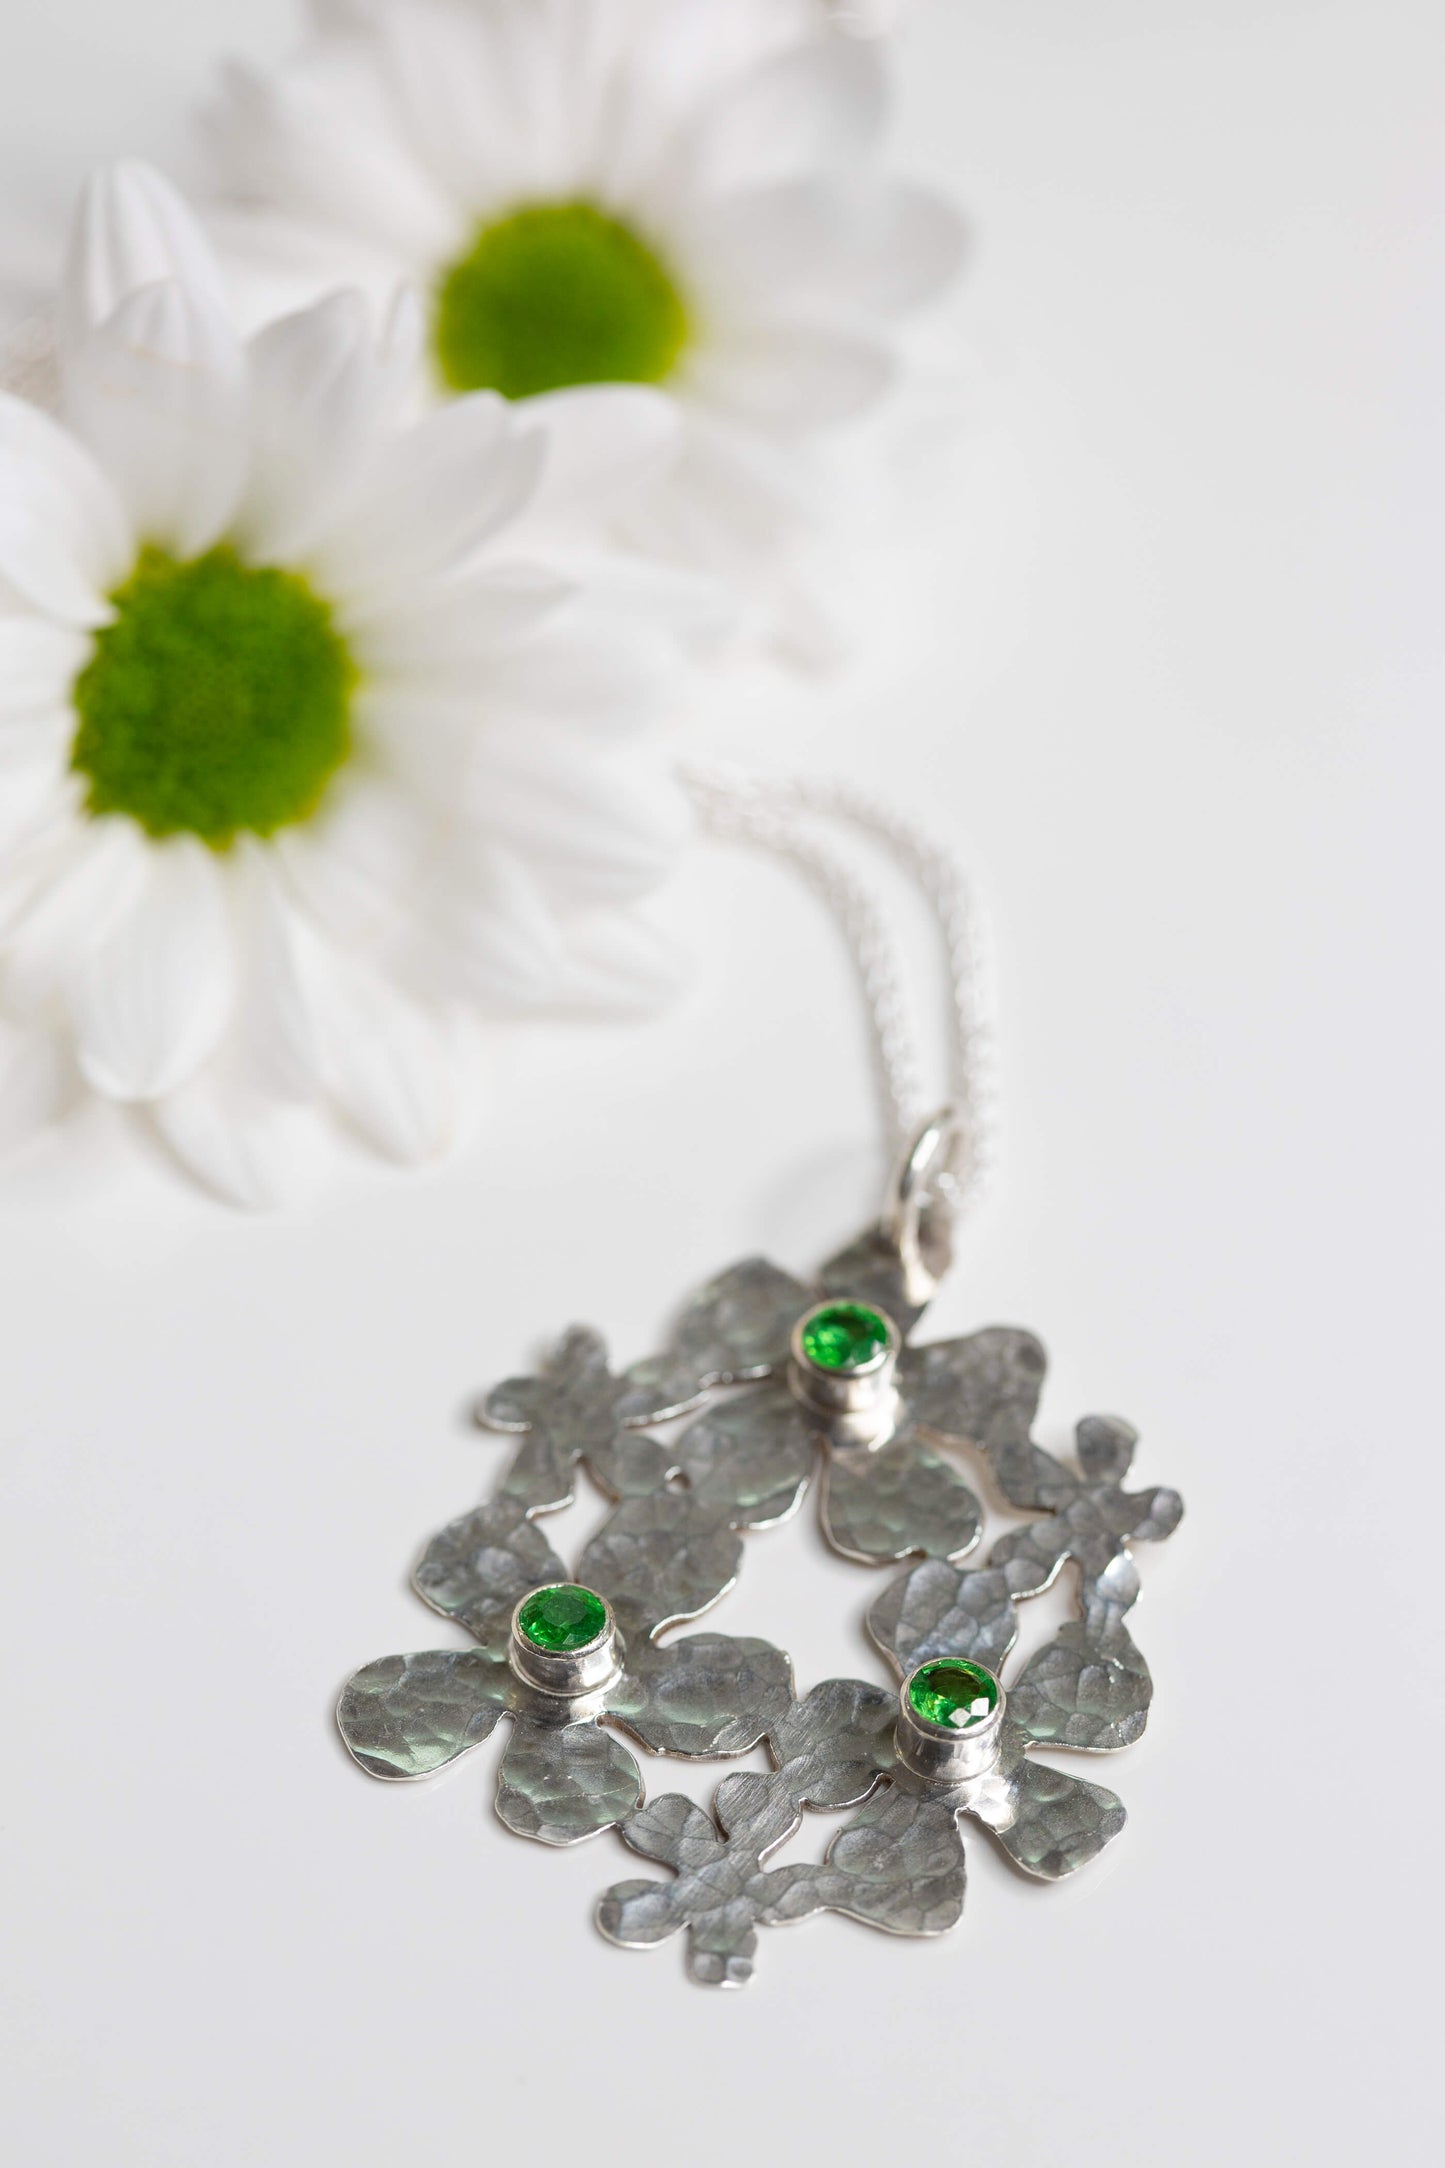 Daisy Delight Sterling Silver Necklace with Tsavorite Garnets